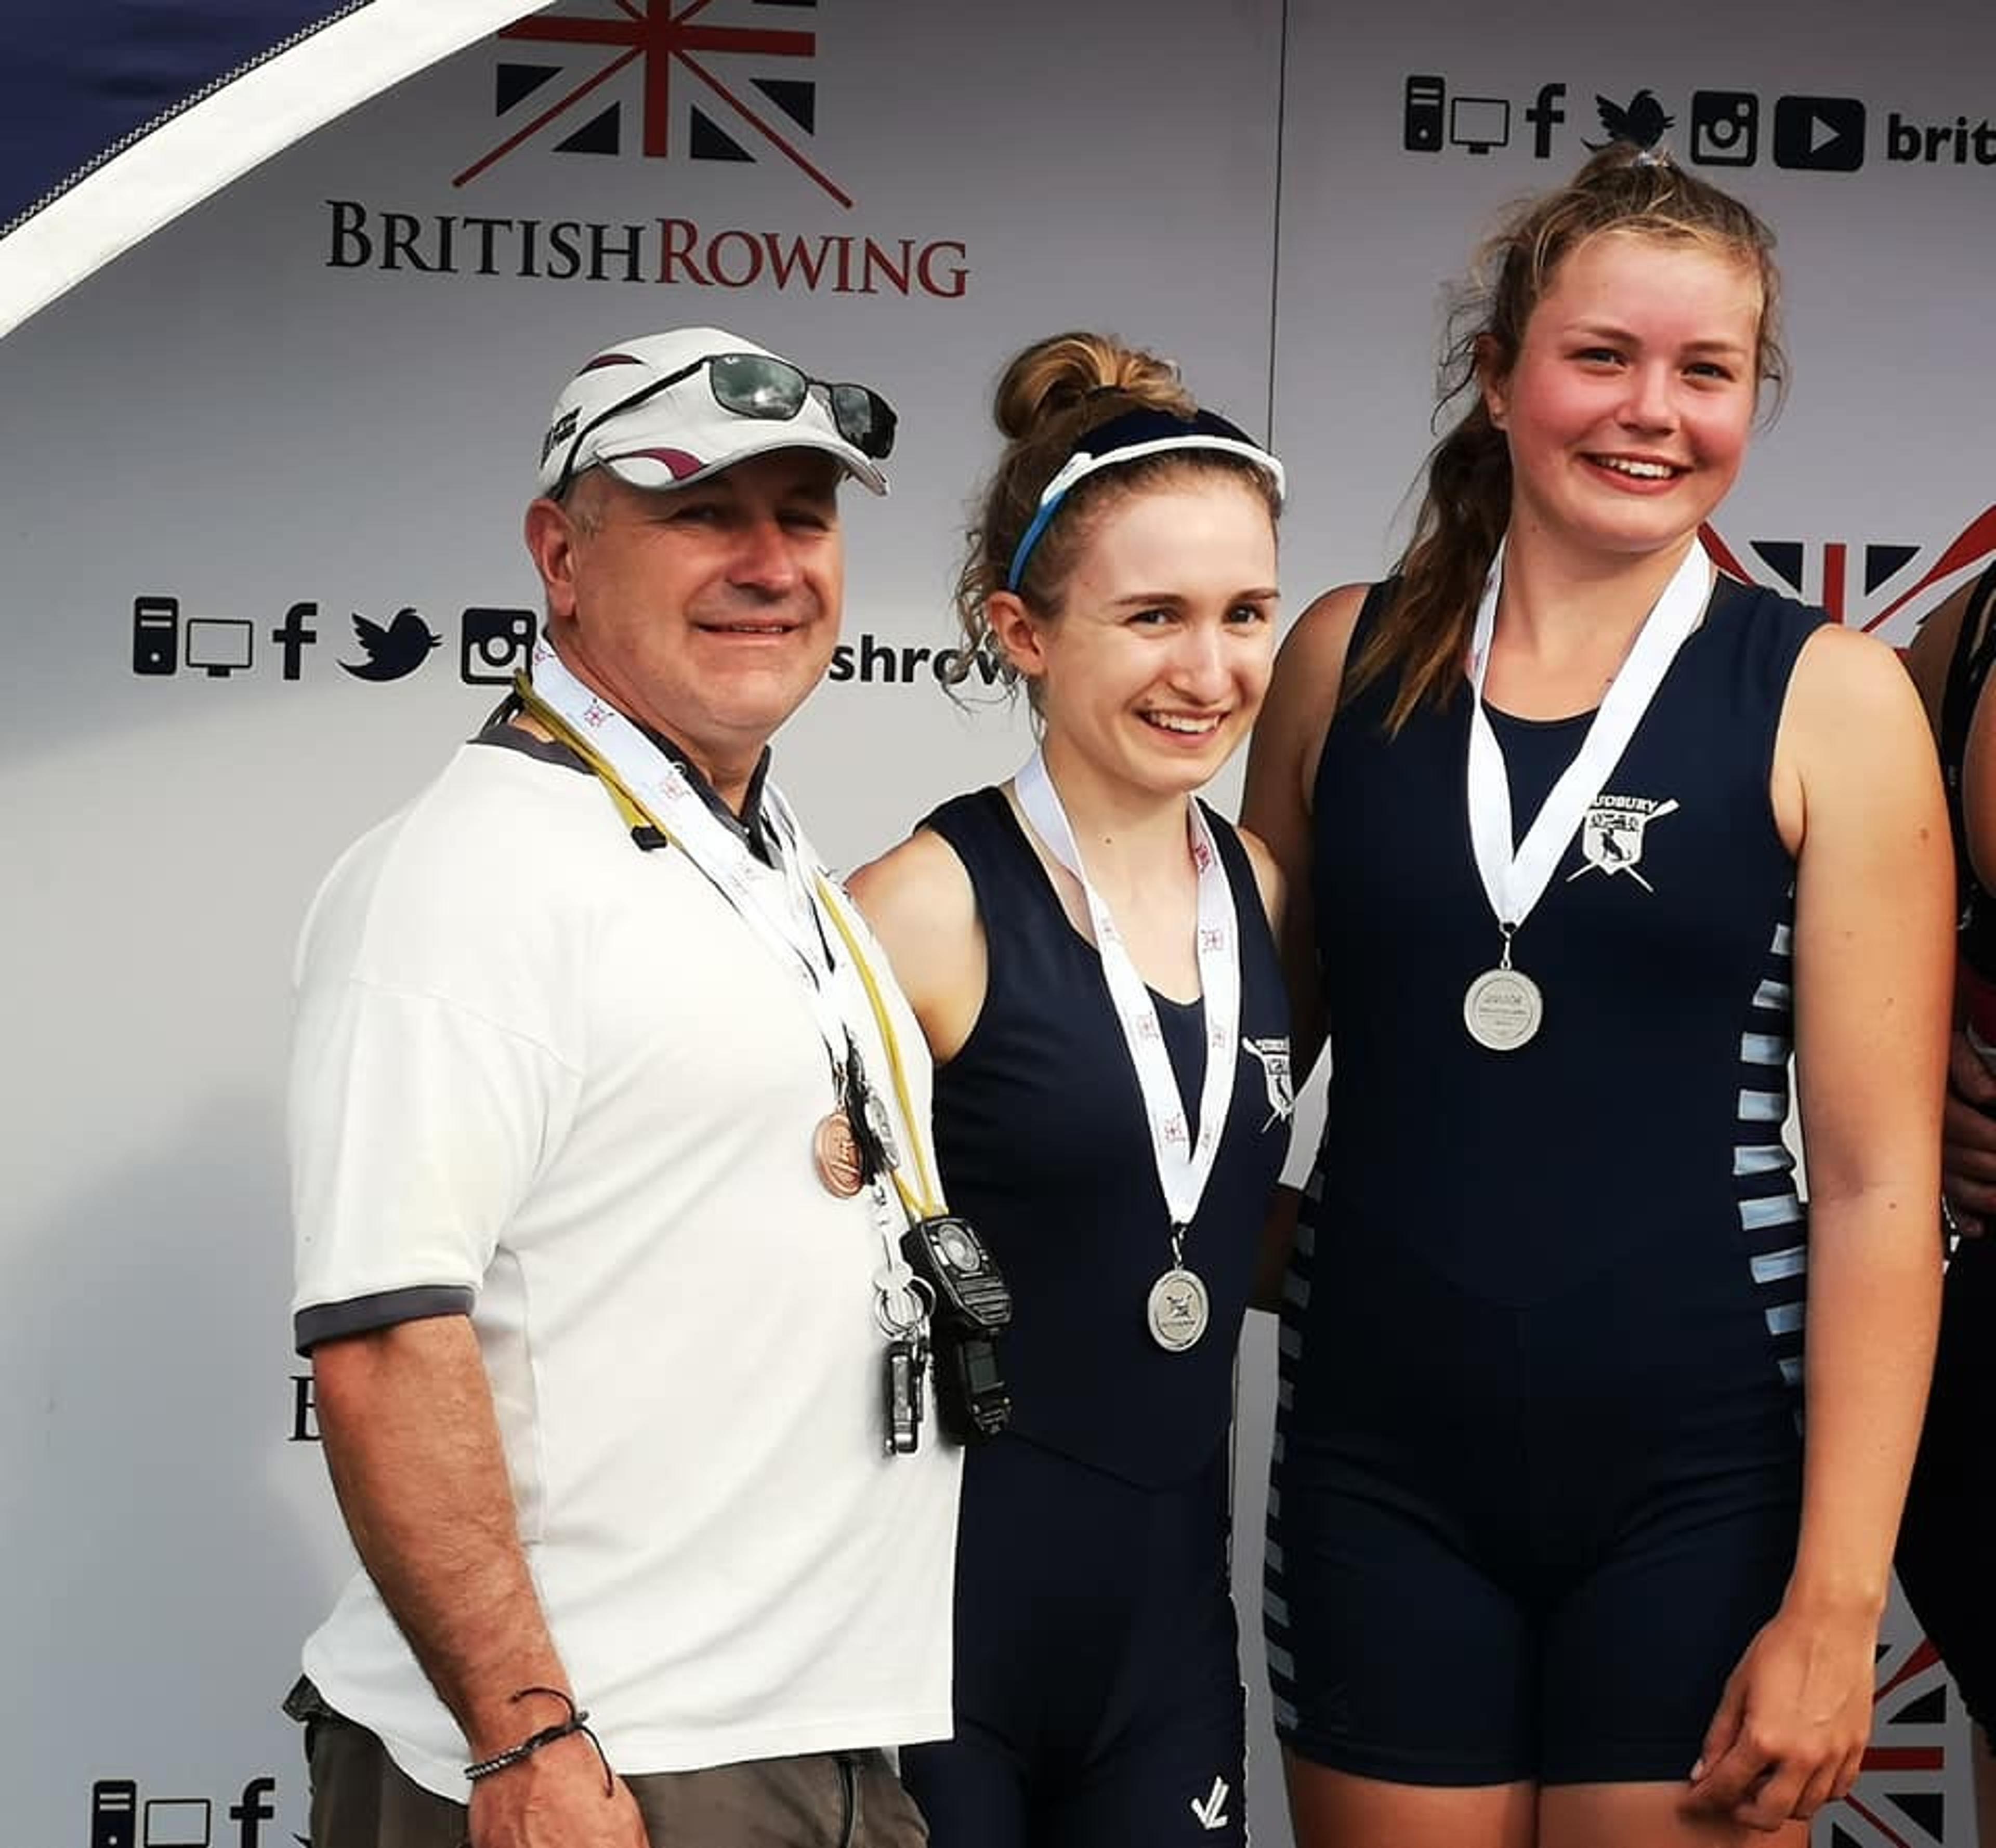 Wearing silver medals, the crew of women’s J18 double grins with their coach. 